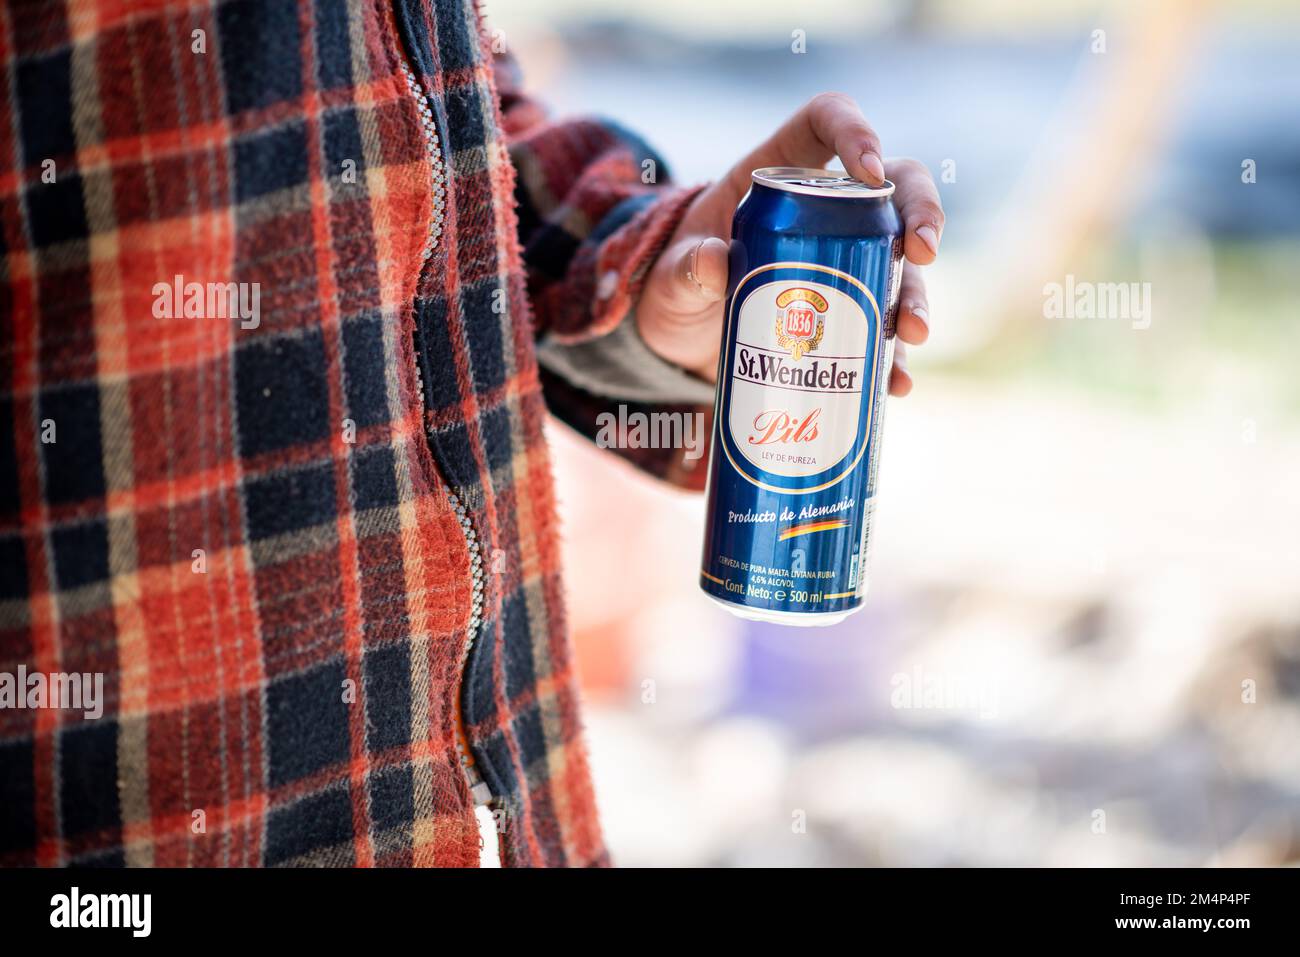 St. Wendeler Beer. Closeup shot I got from when I was shooting a gig for the German brand. I think these vibrant colours work well for the image. Stock Photo